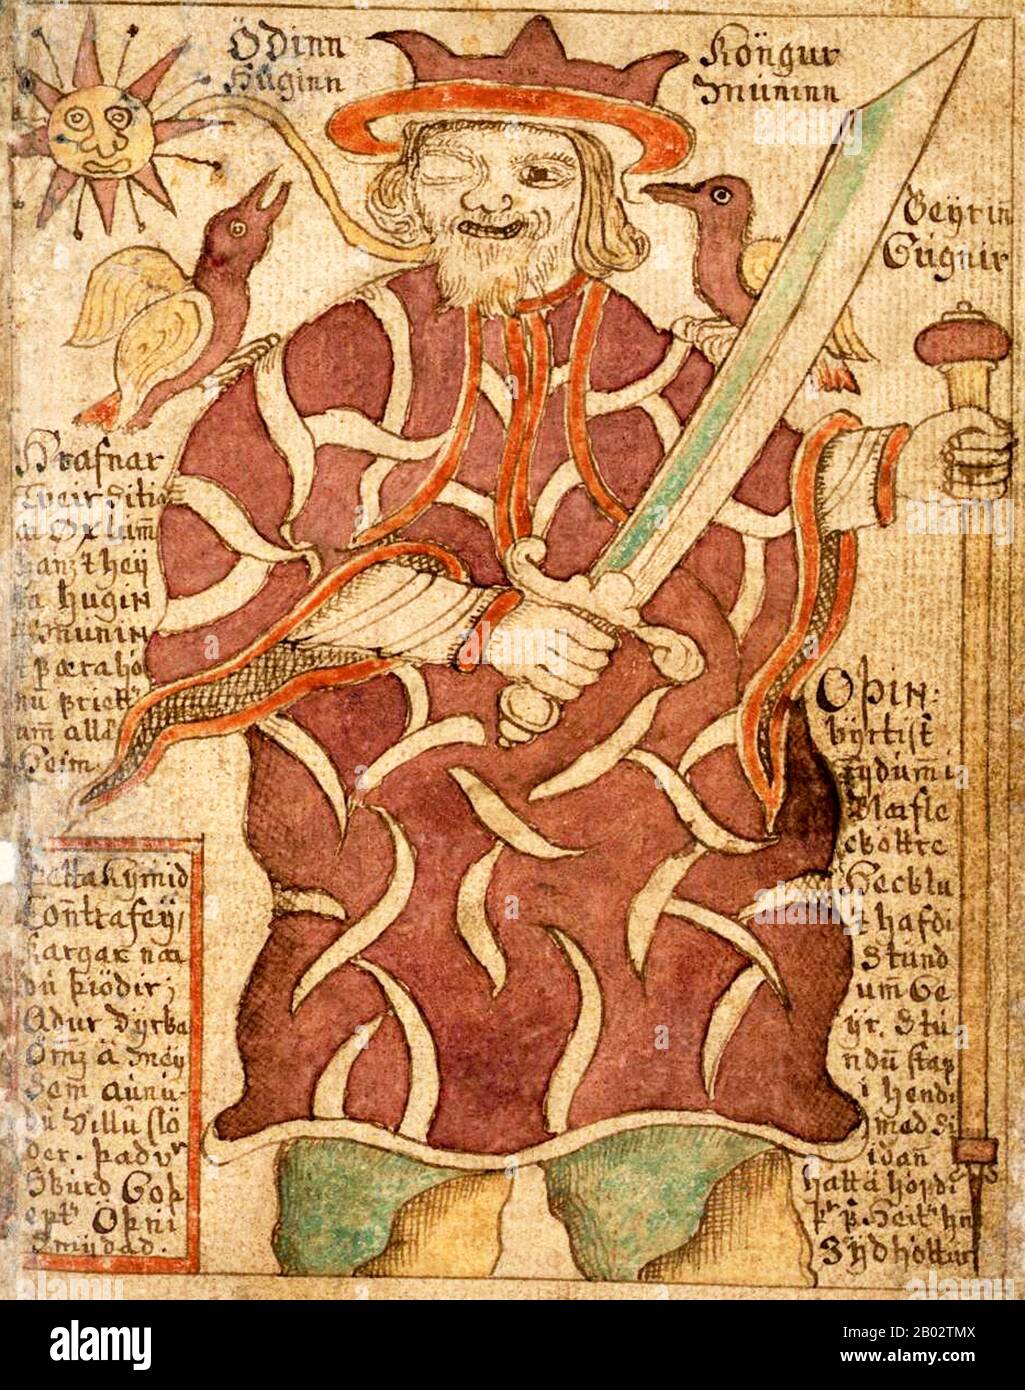 The Poetic Edda is a collection of Old Norse poems primarily preserved in the Icelandic mediaeval manuscript Codex Regius.  Together with Snorri Sturluson's Prose Edda, the Poetic Edda is the most important extant source on Norse mythology and Germanic heroic legends. Stock Photo